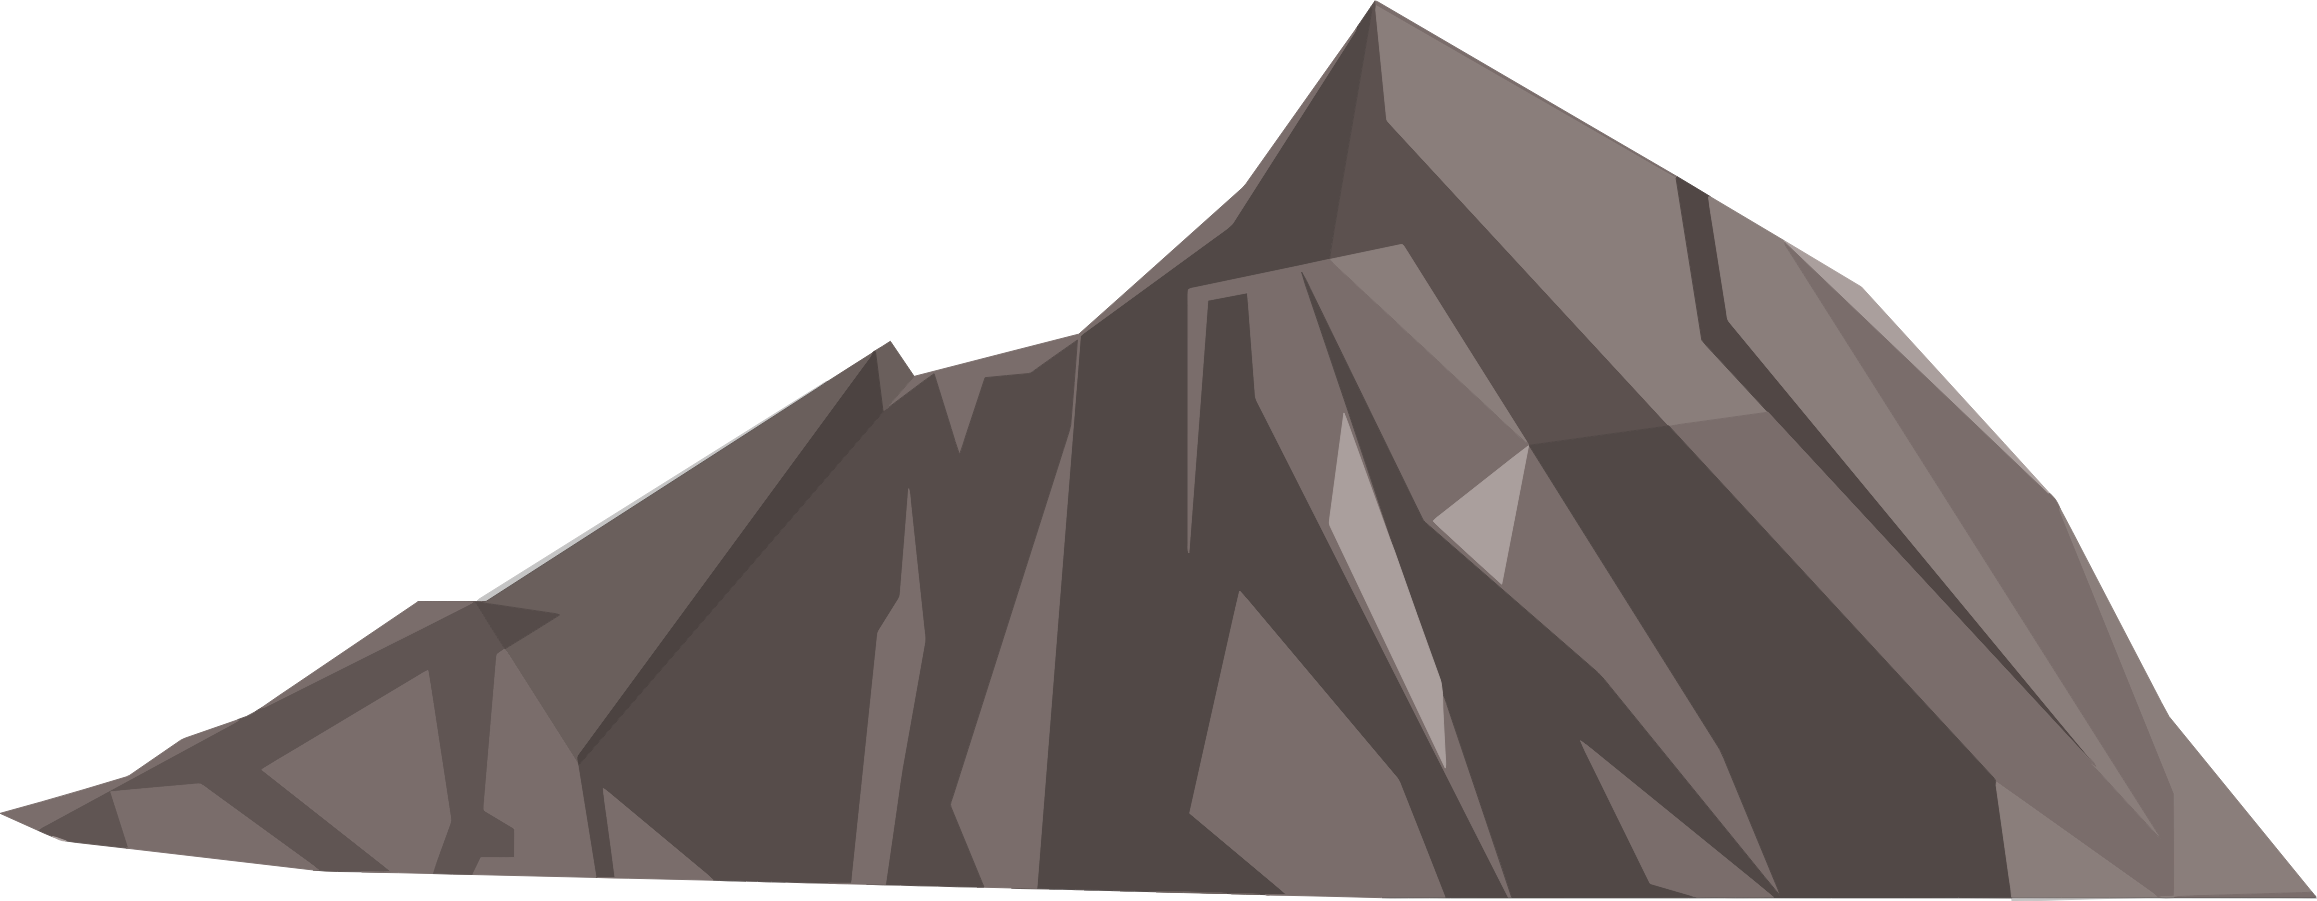 Mountain PNG Clipart